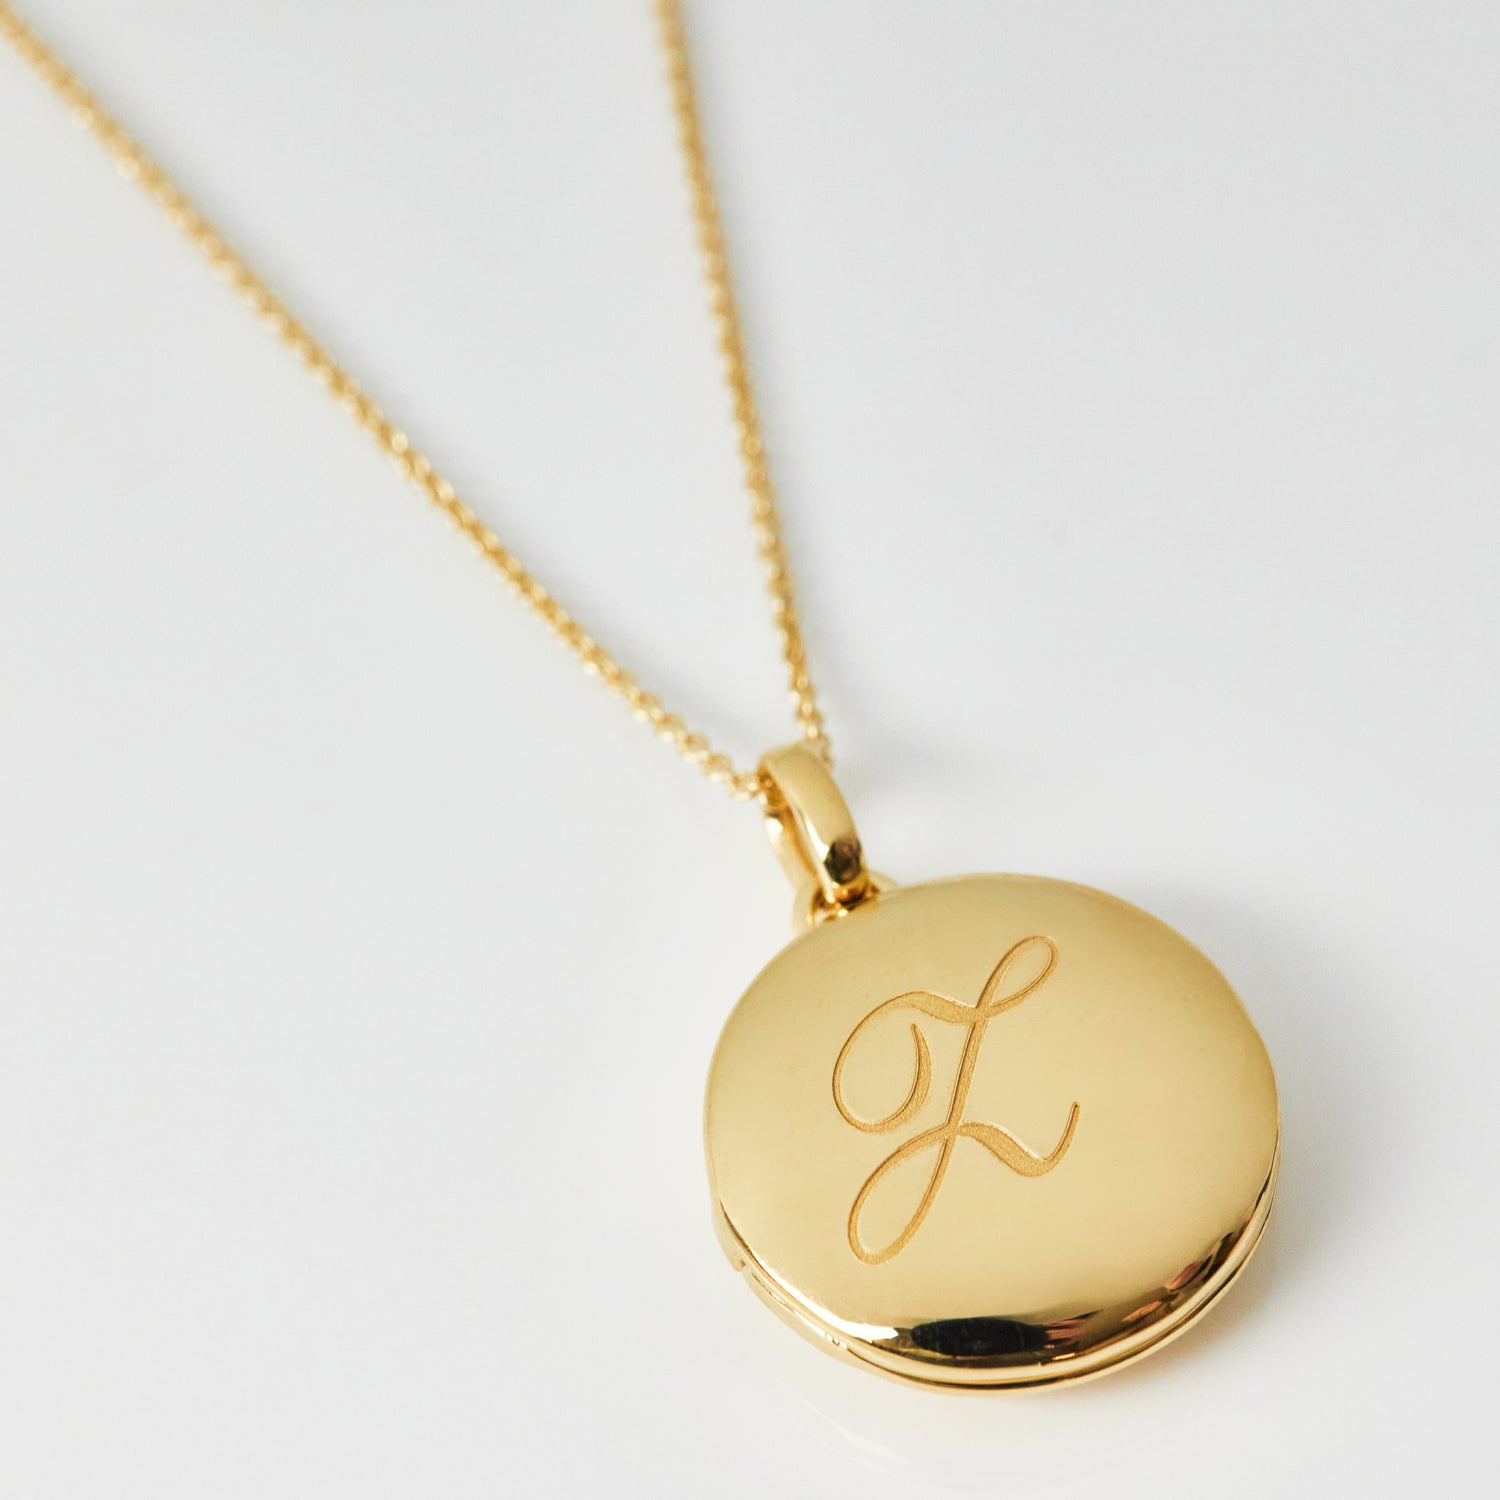 The Mini Ornate Photo Locket Necklace - Gold Vermeil - Letter : Add Picture - Length : 16 in - The M Jewelers